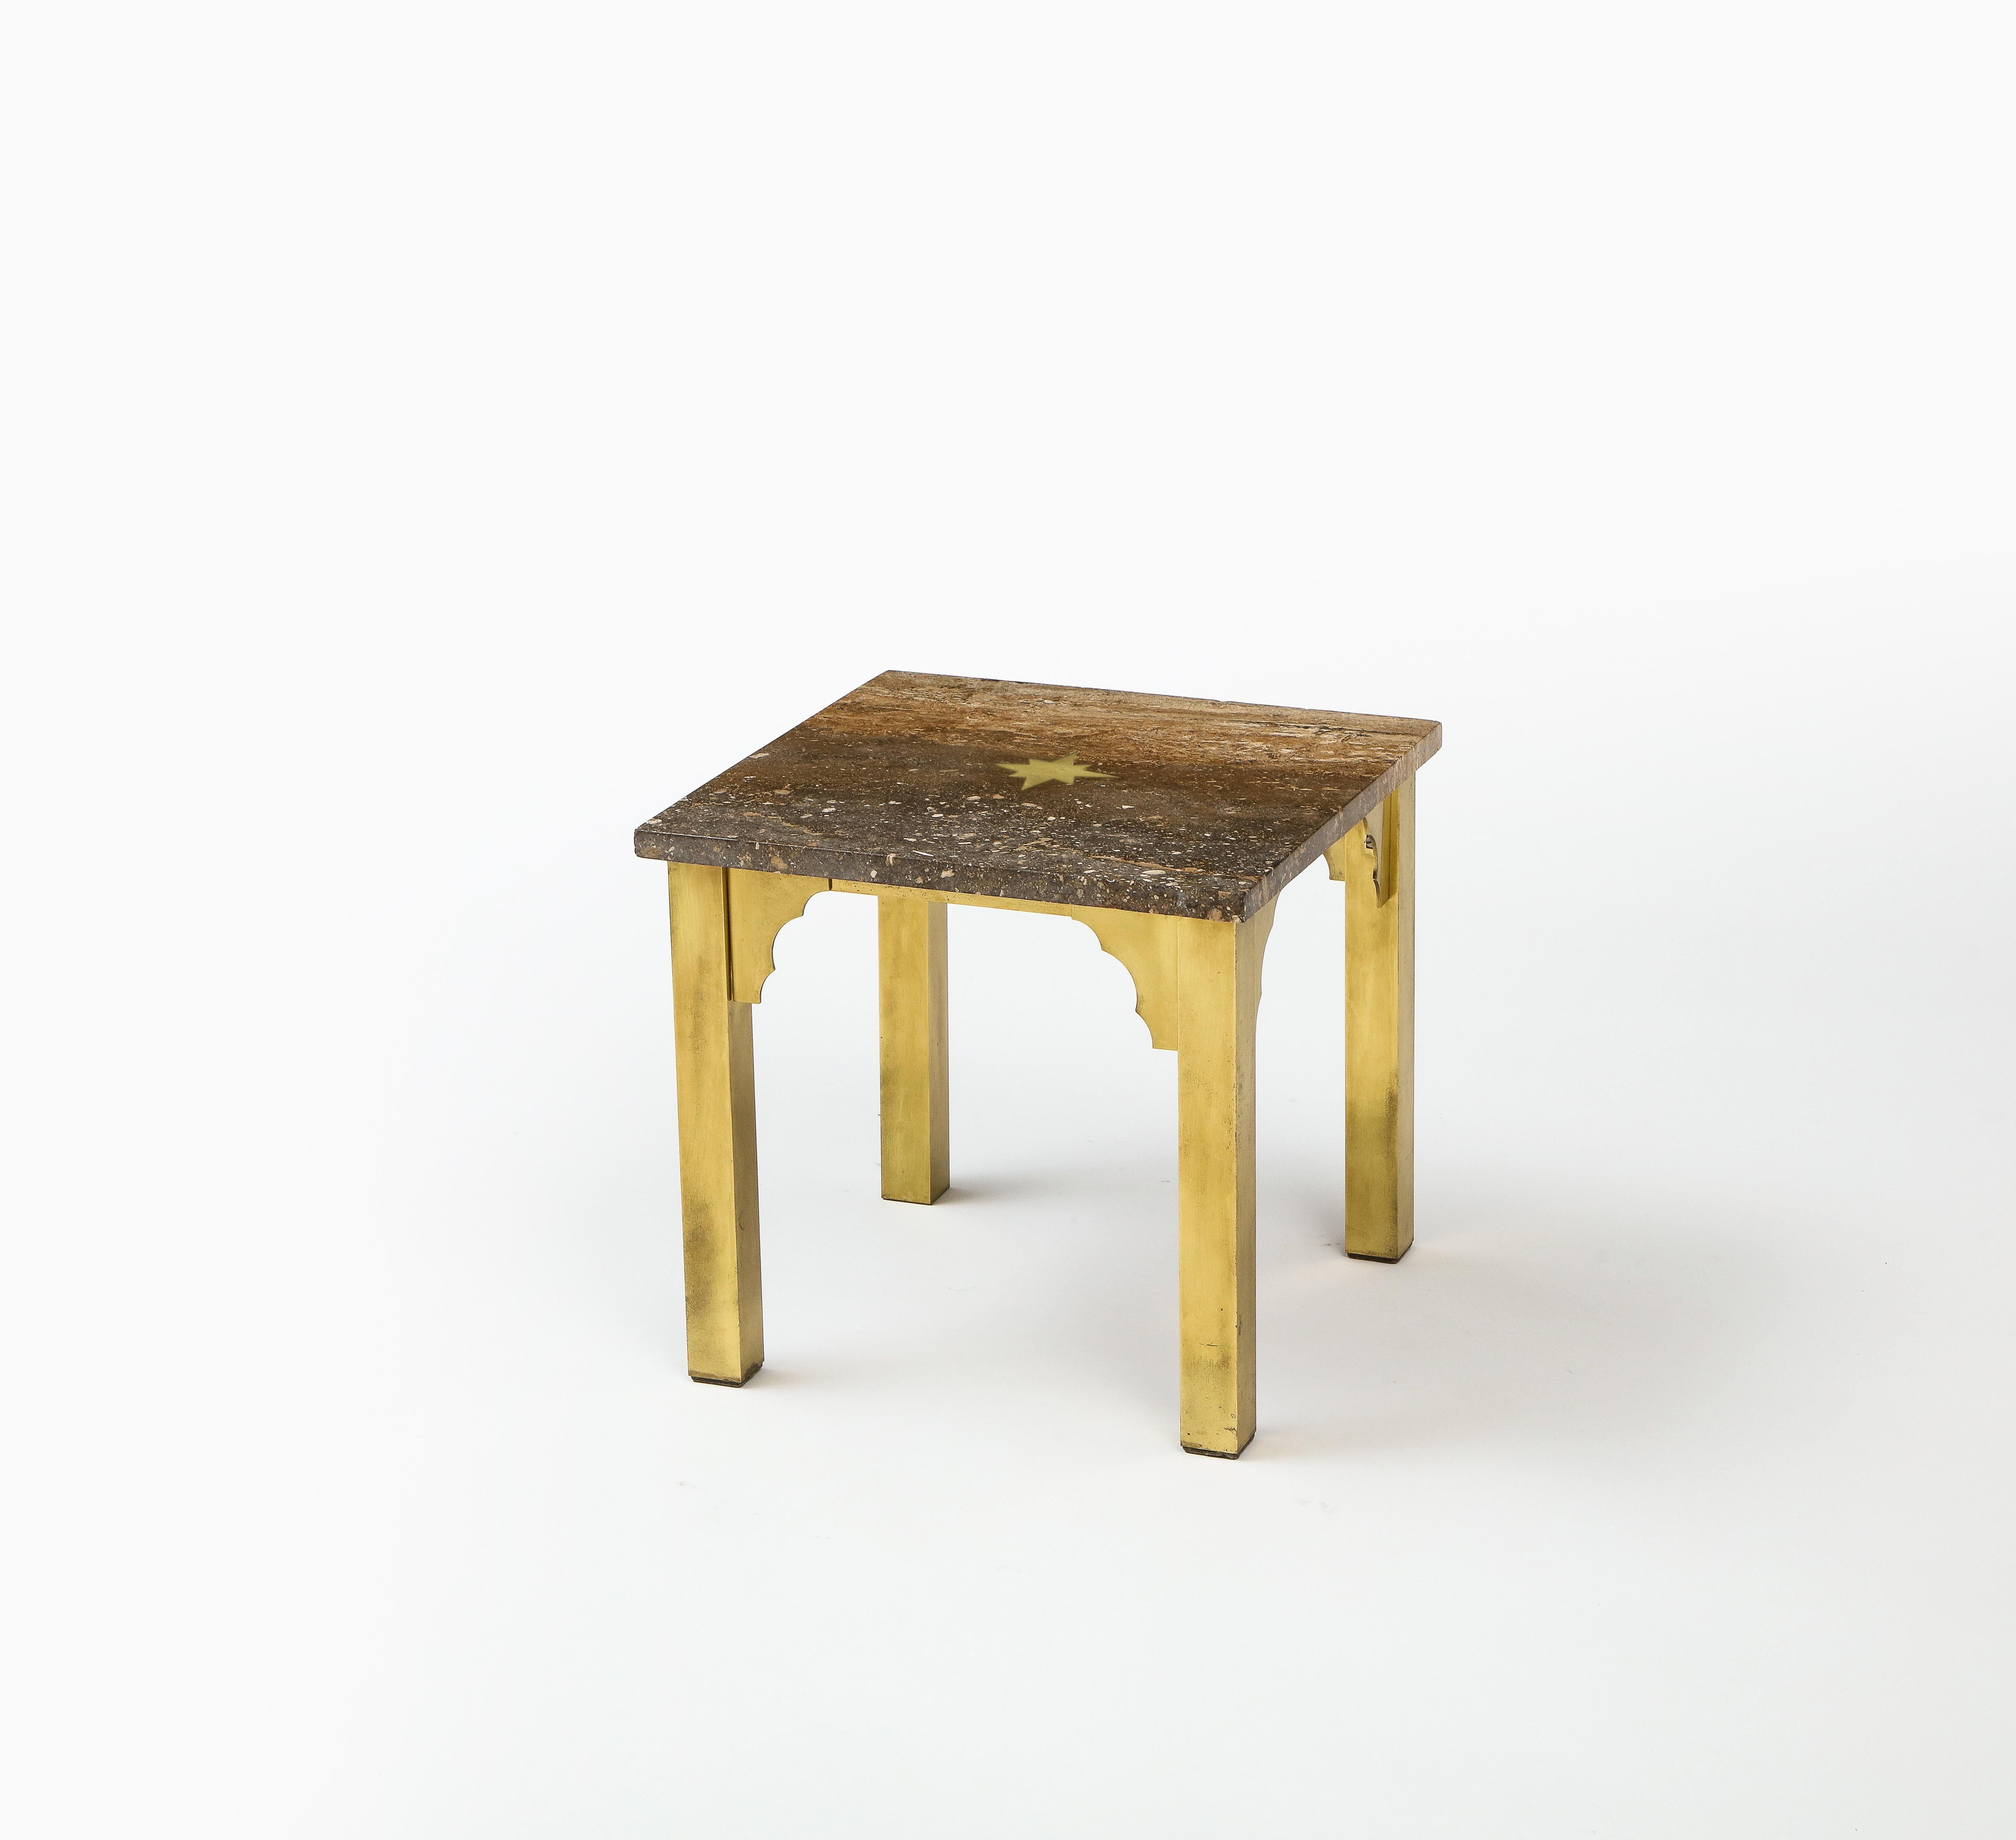 Small Square Table in Brass & Travertine, Inlay & Arabesque Details, USA 1960's For Sale 1